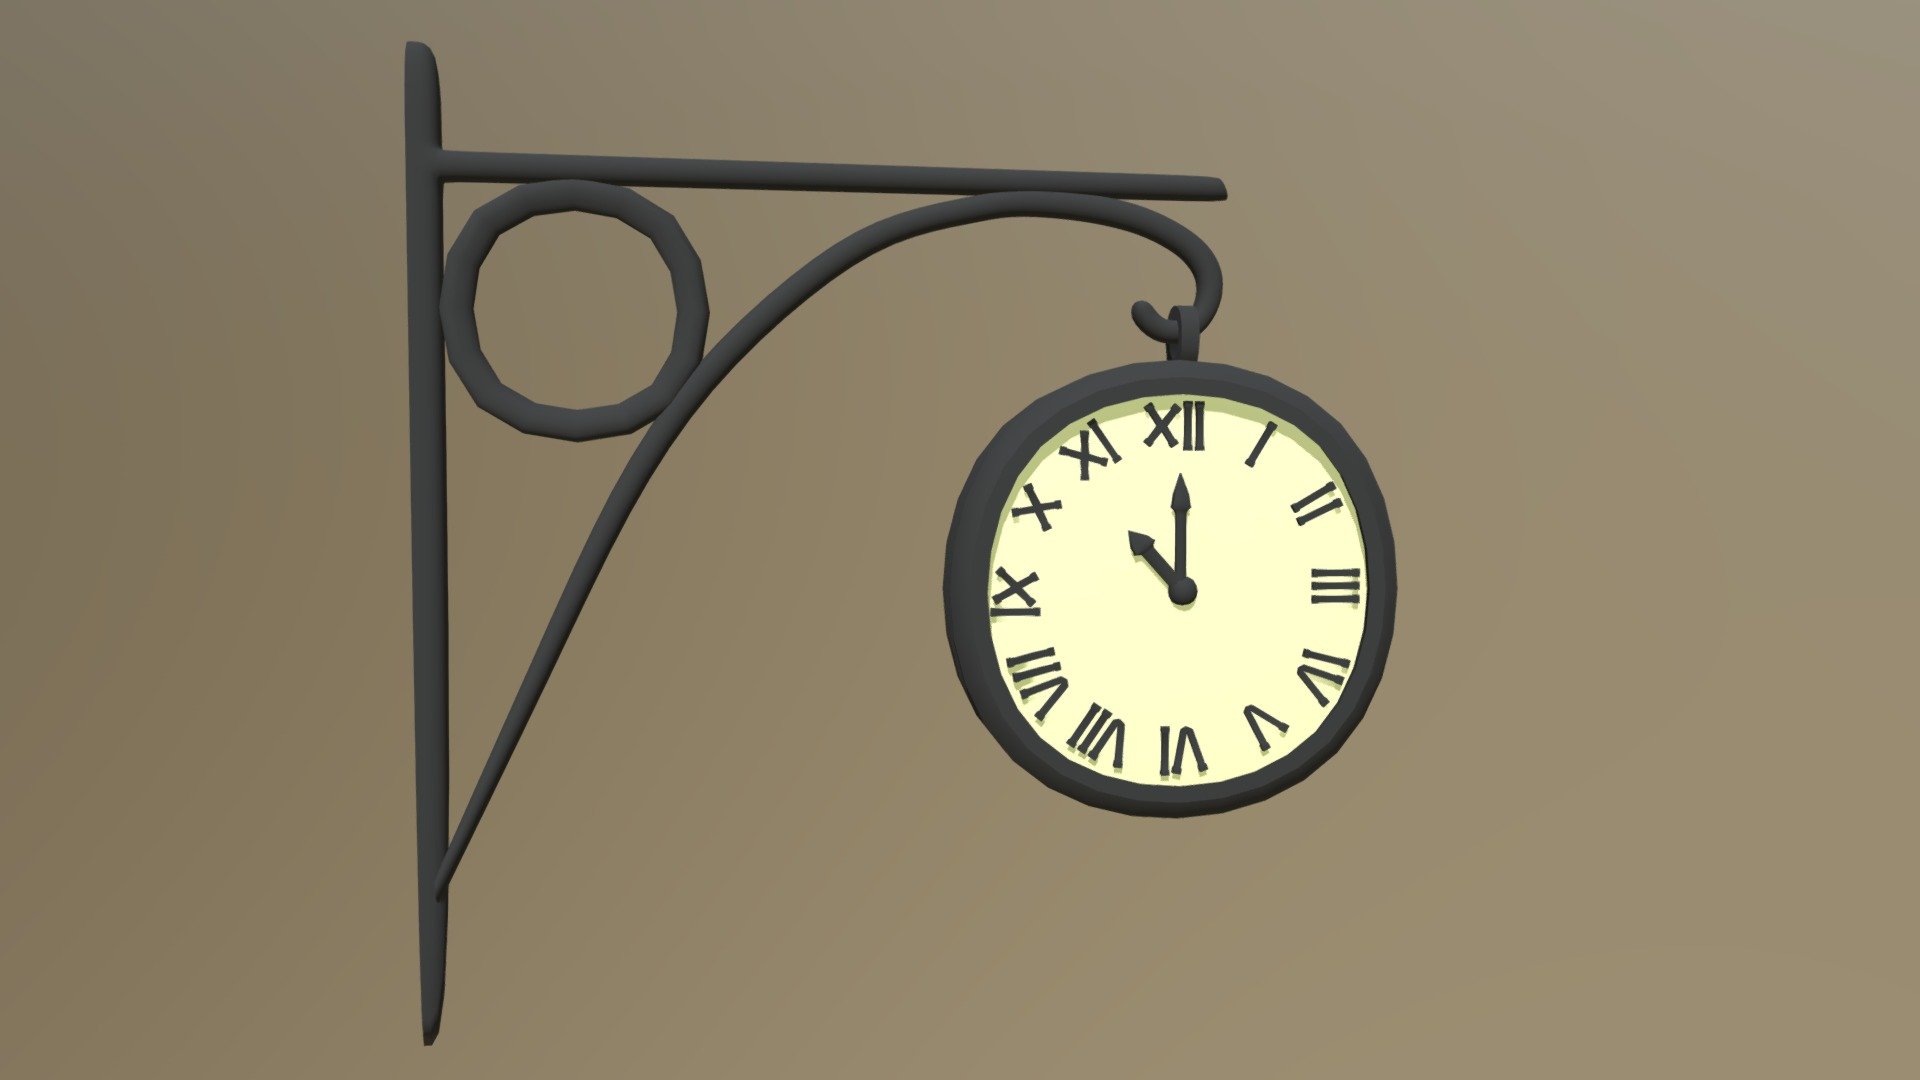 A prop make for a class exercice animation. A clock of a train station. Modeled in less than 2 hours.

Clock hands modeled separately so they can be animated easily. Centered all in the axis of the clock 3d model